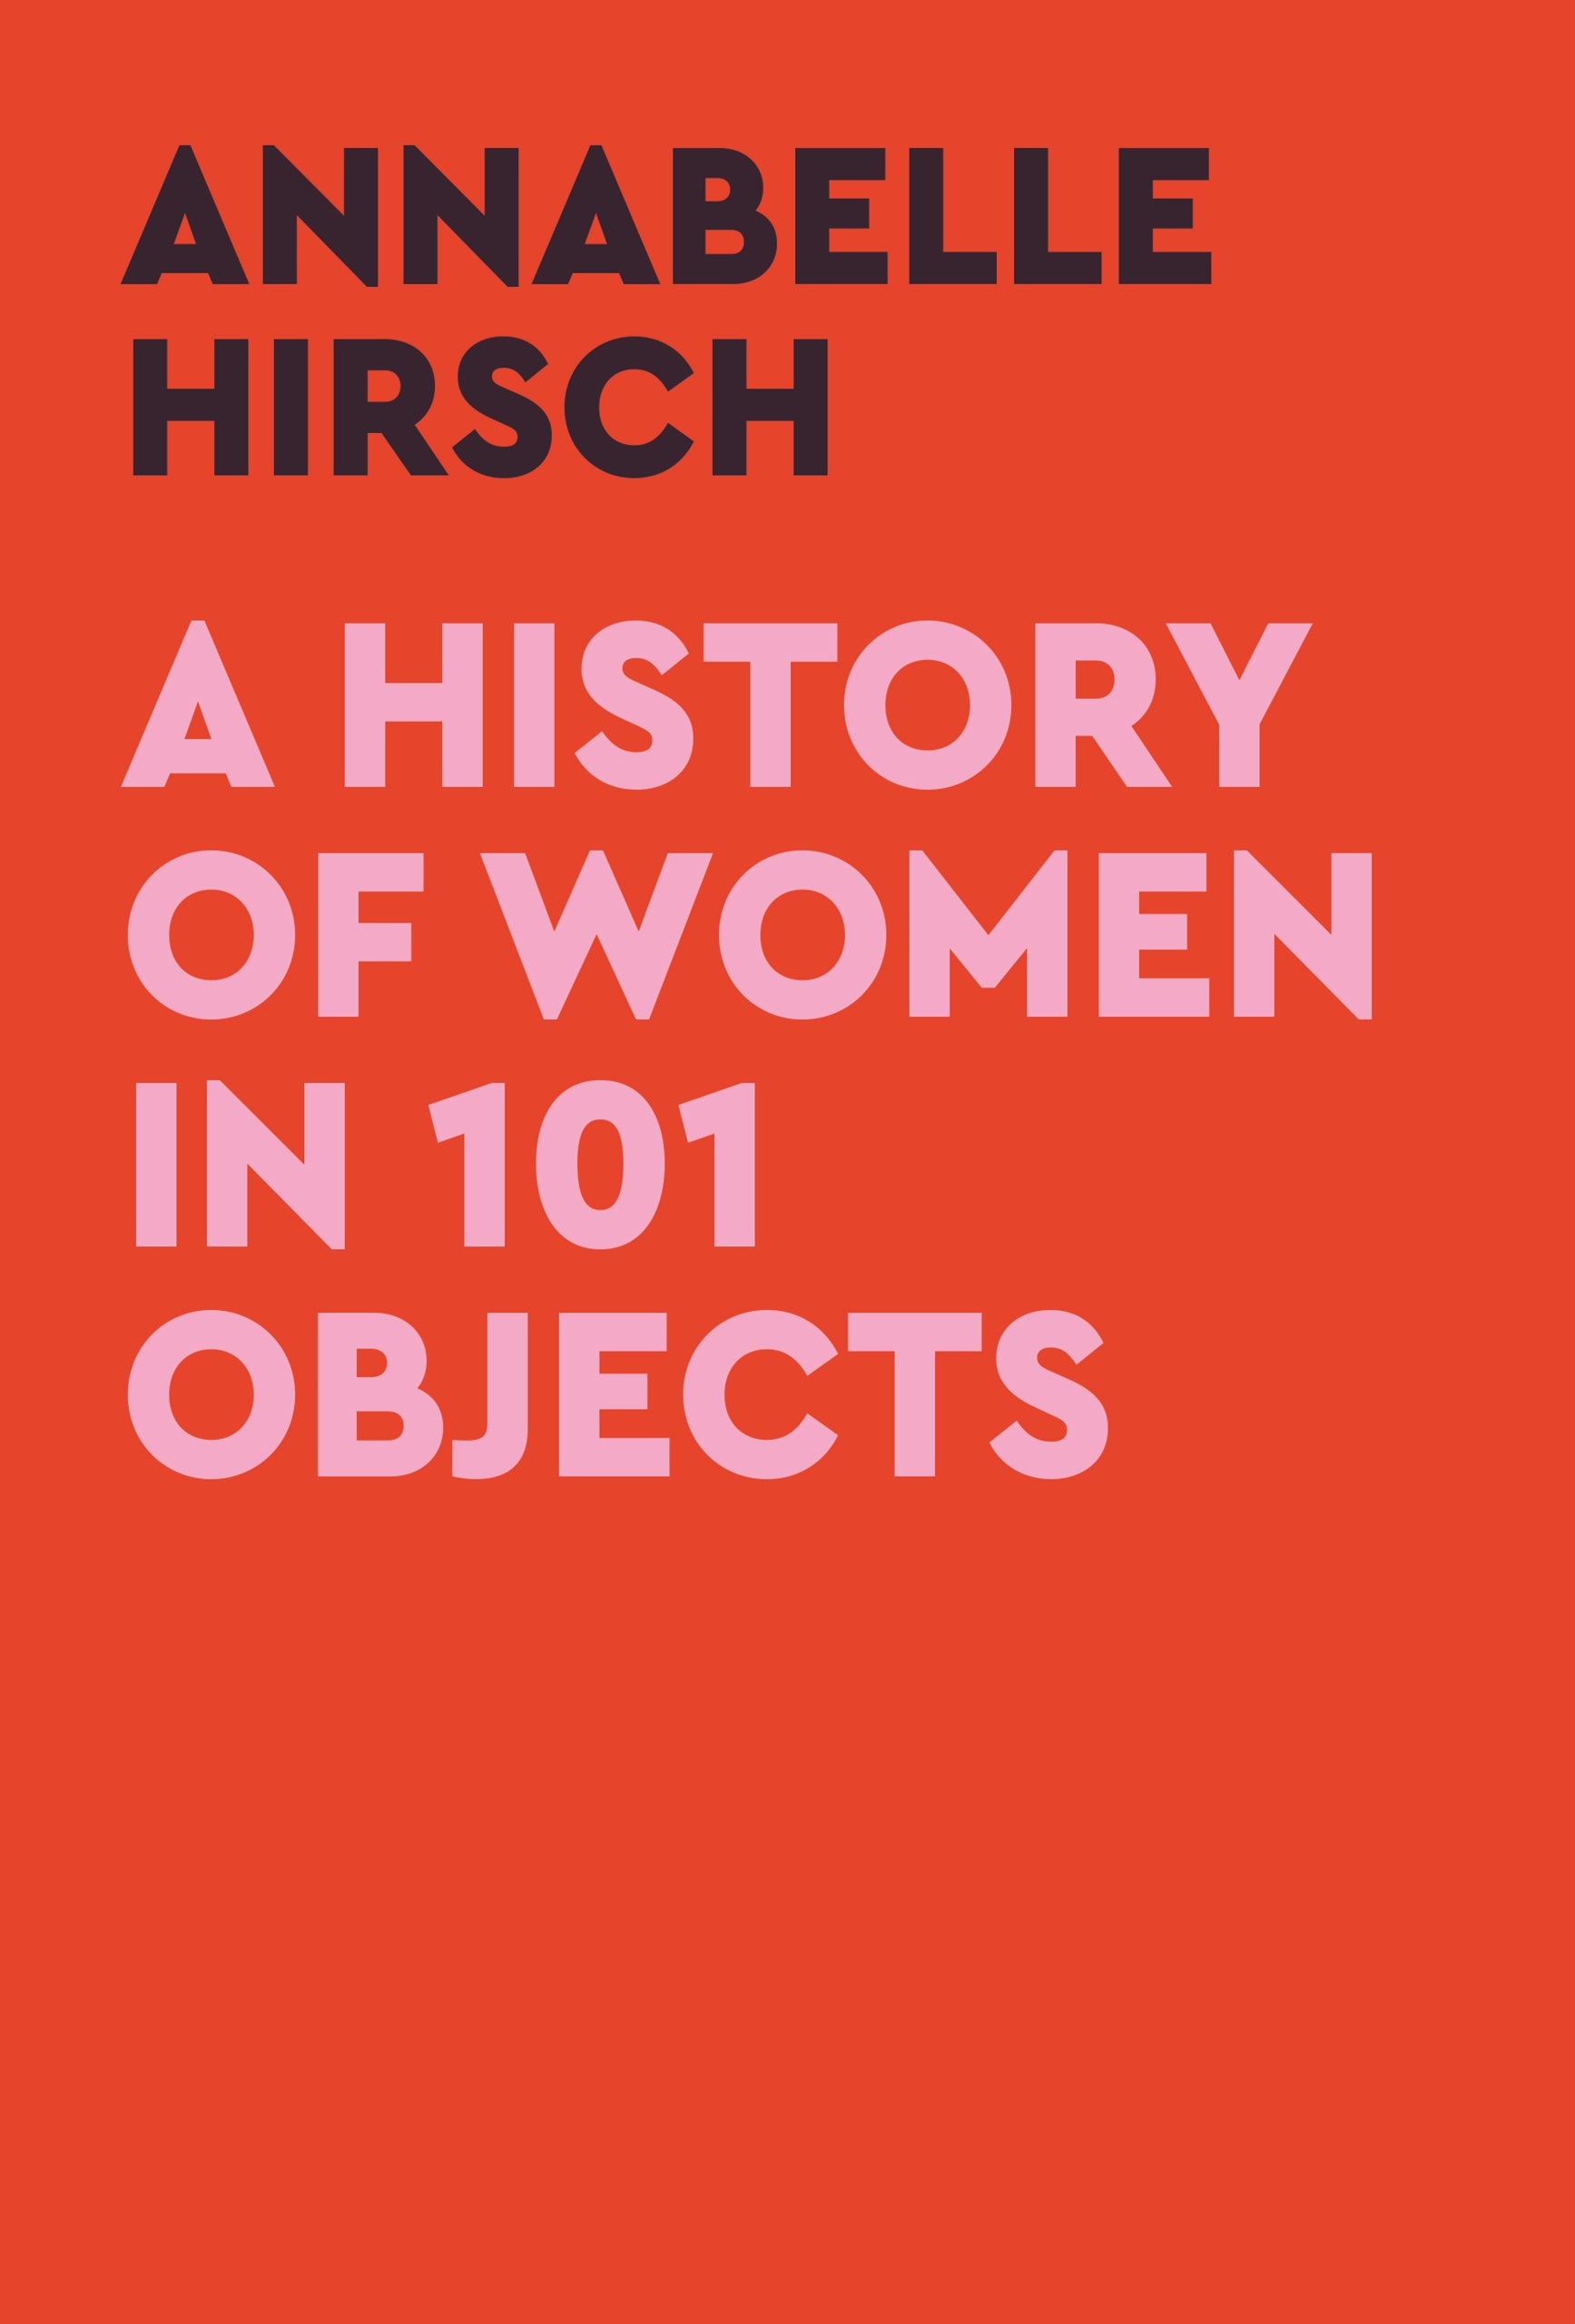 A History of Women in 101 Objects: A Walk Through Female History by Annabelle Hirsh